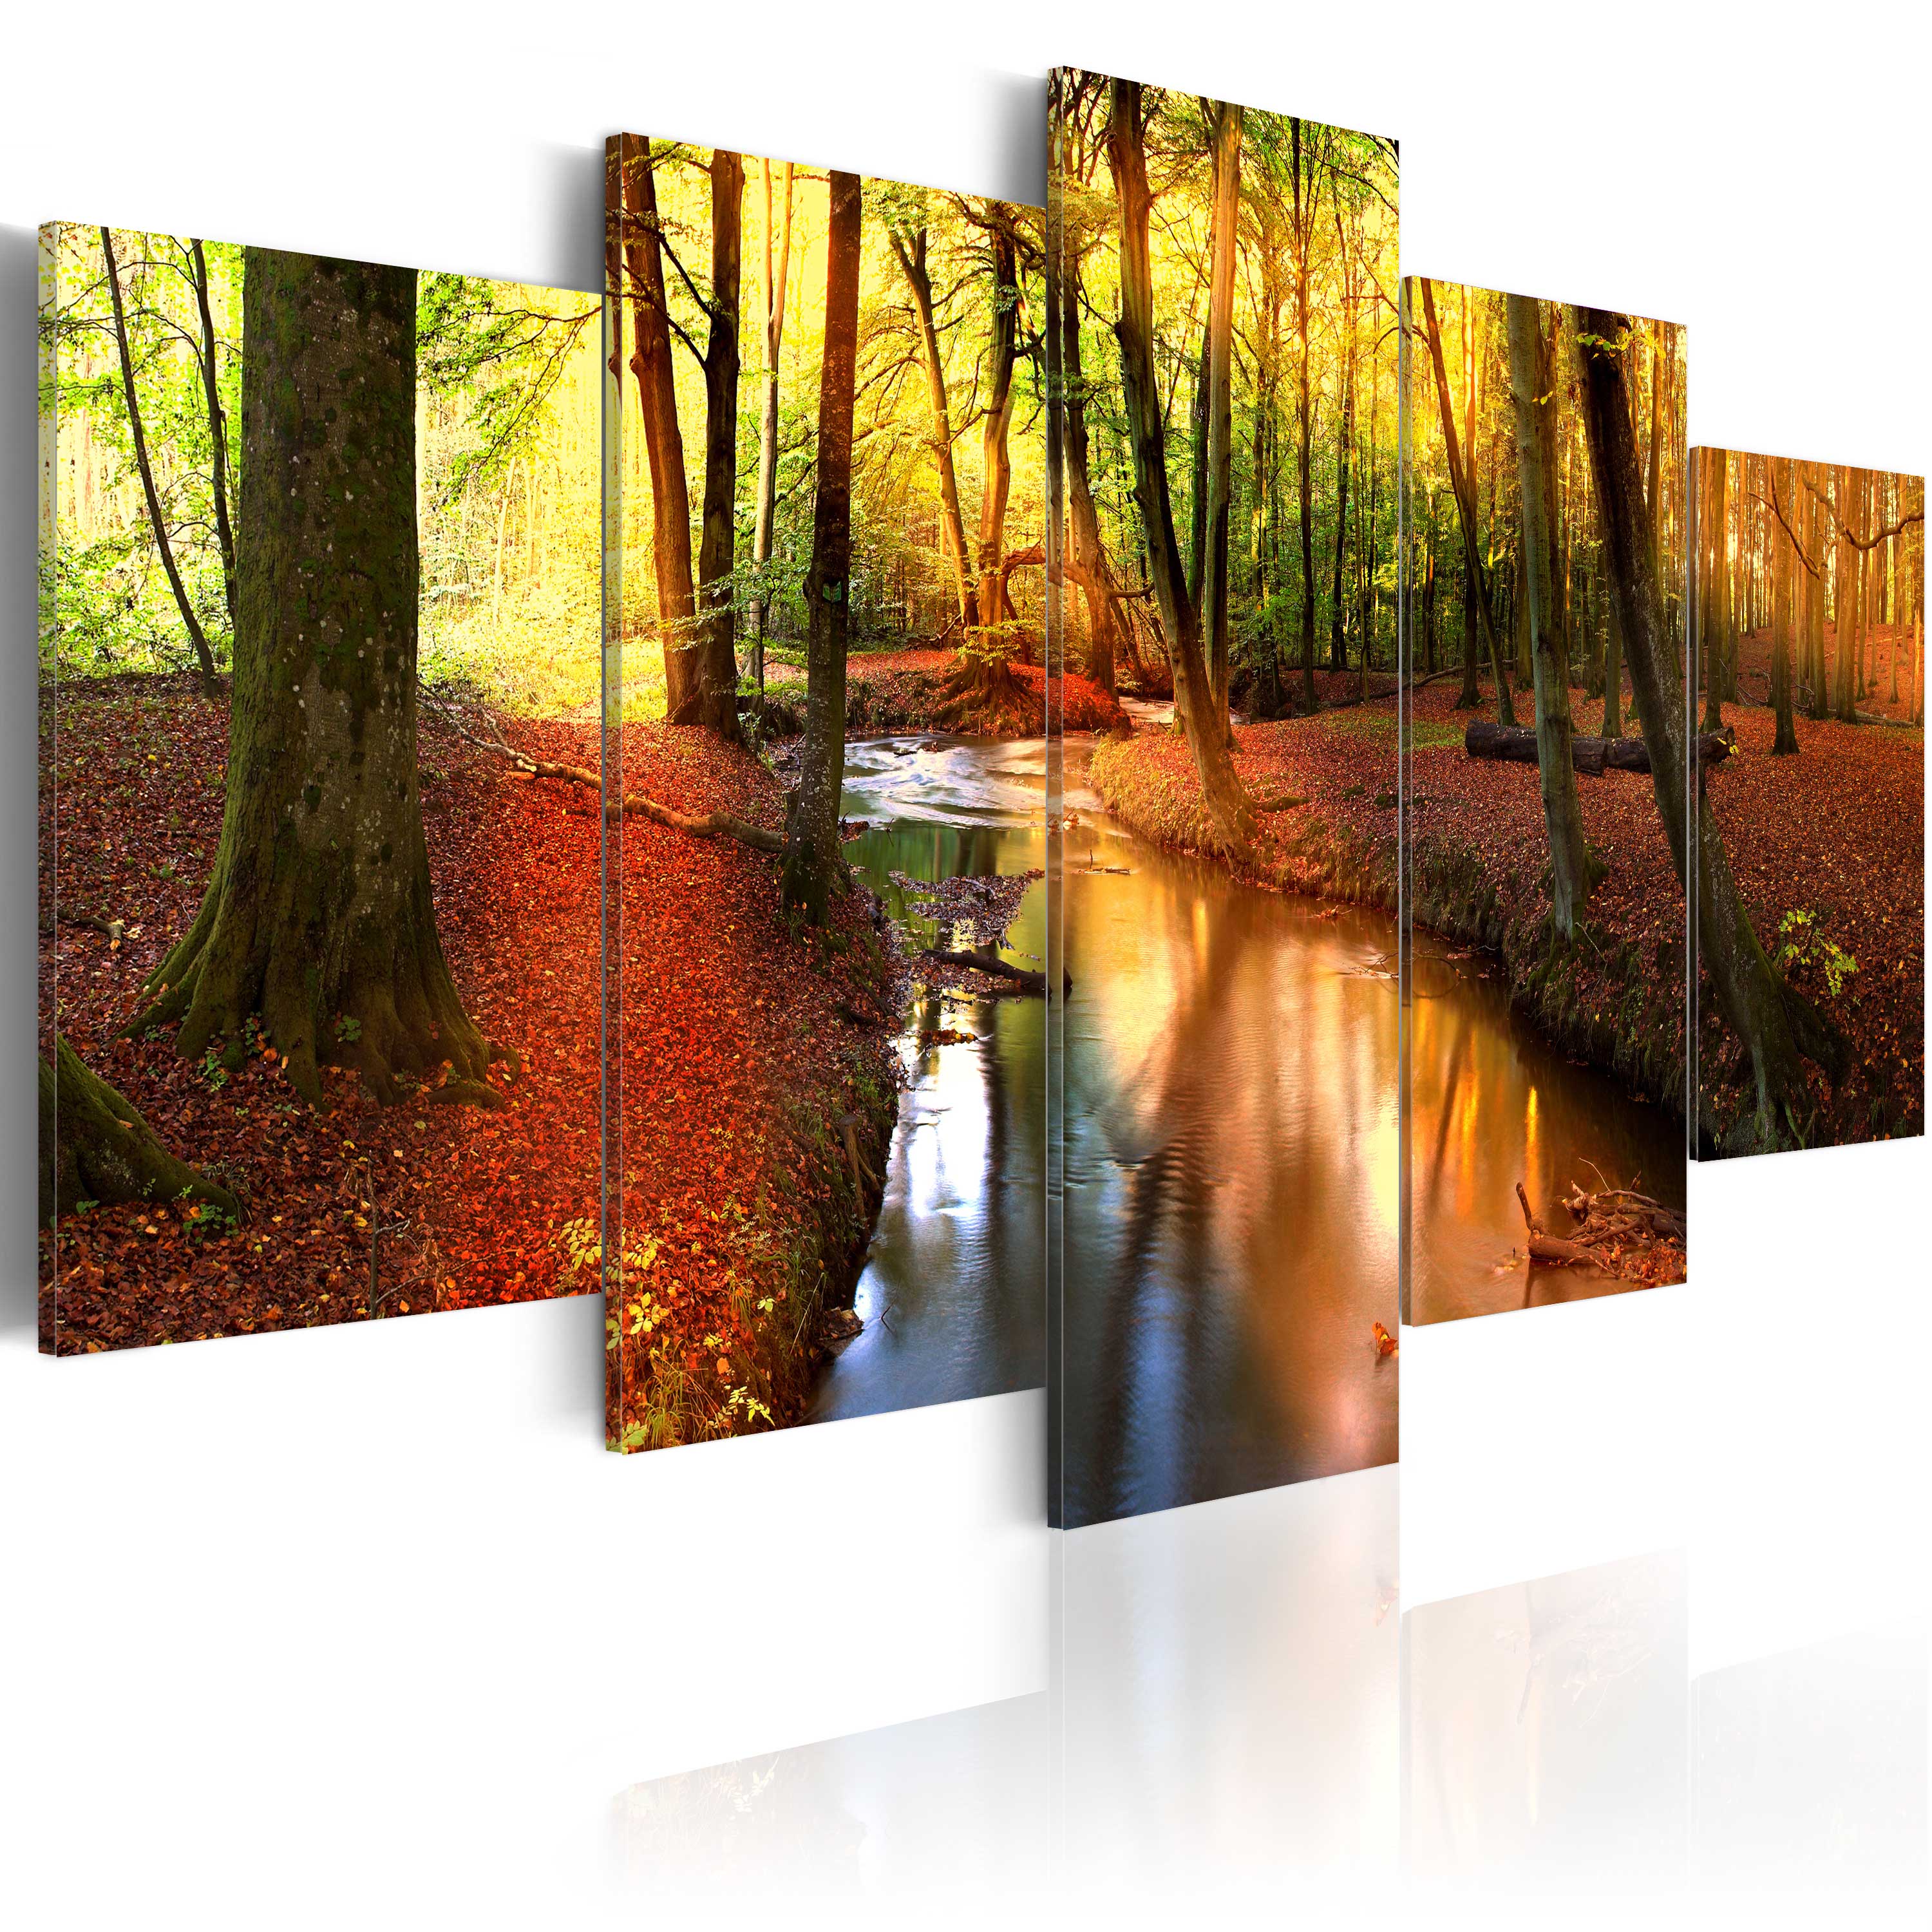 Canvas Print - Silent forest - 200x100